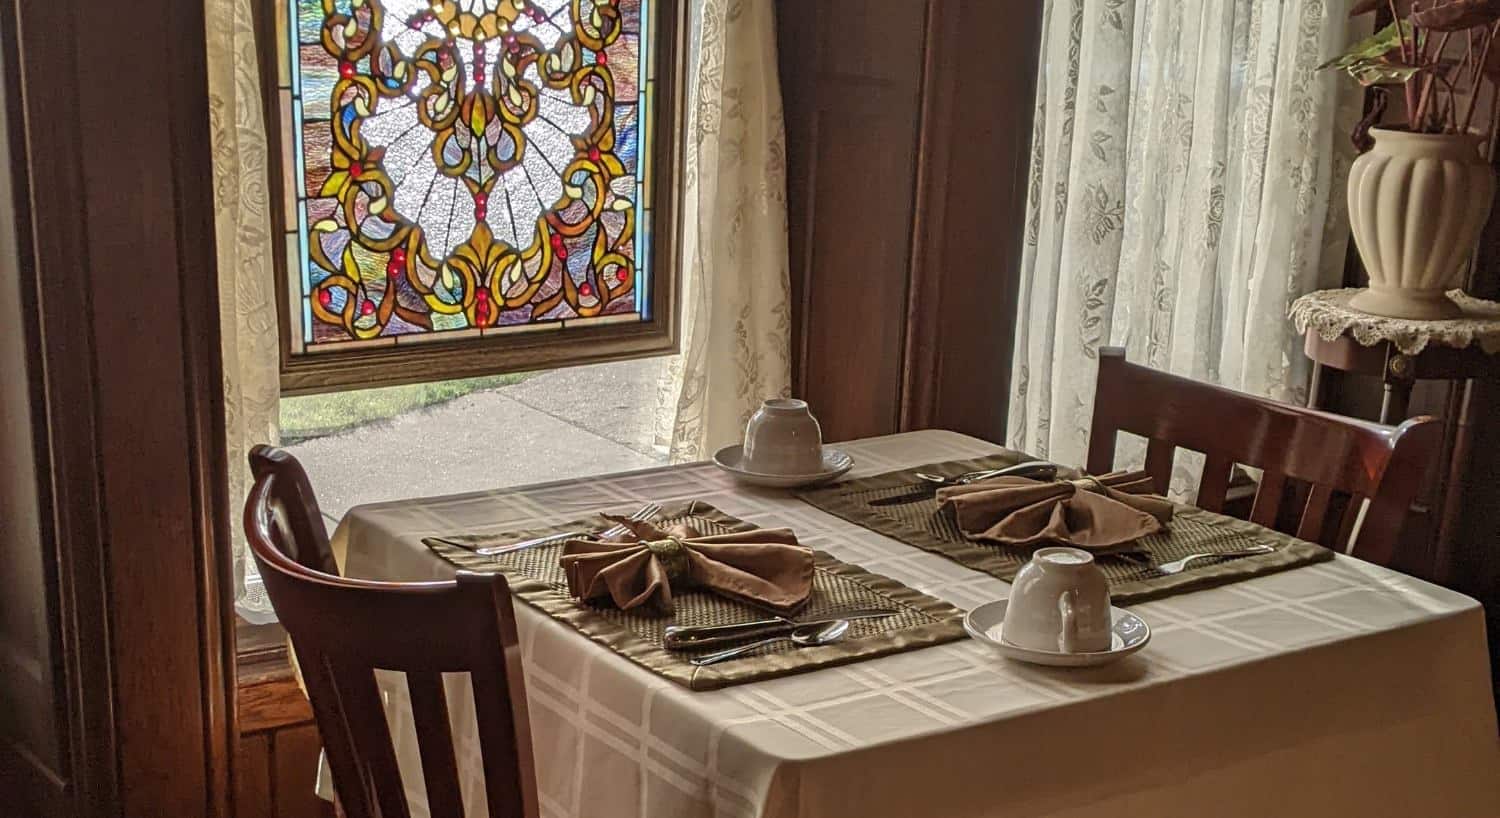 Table with two place settings next to window with a hanging framed stained glass piece of art